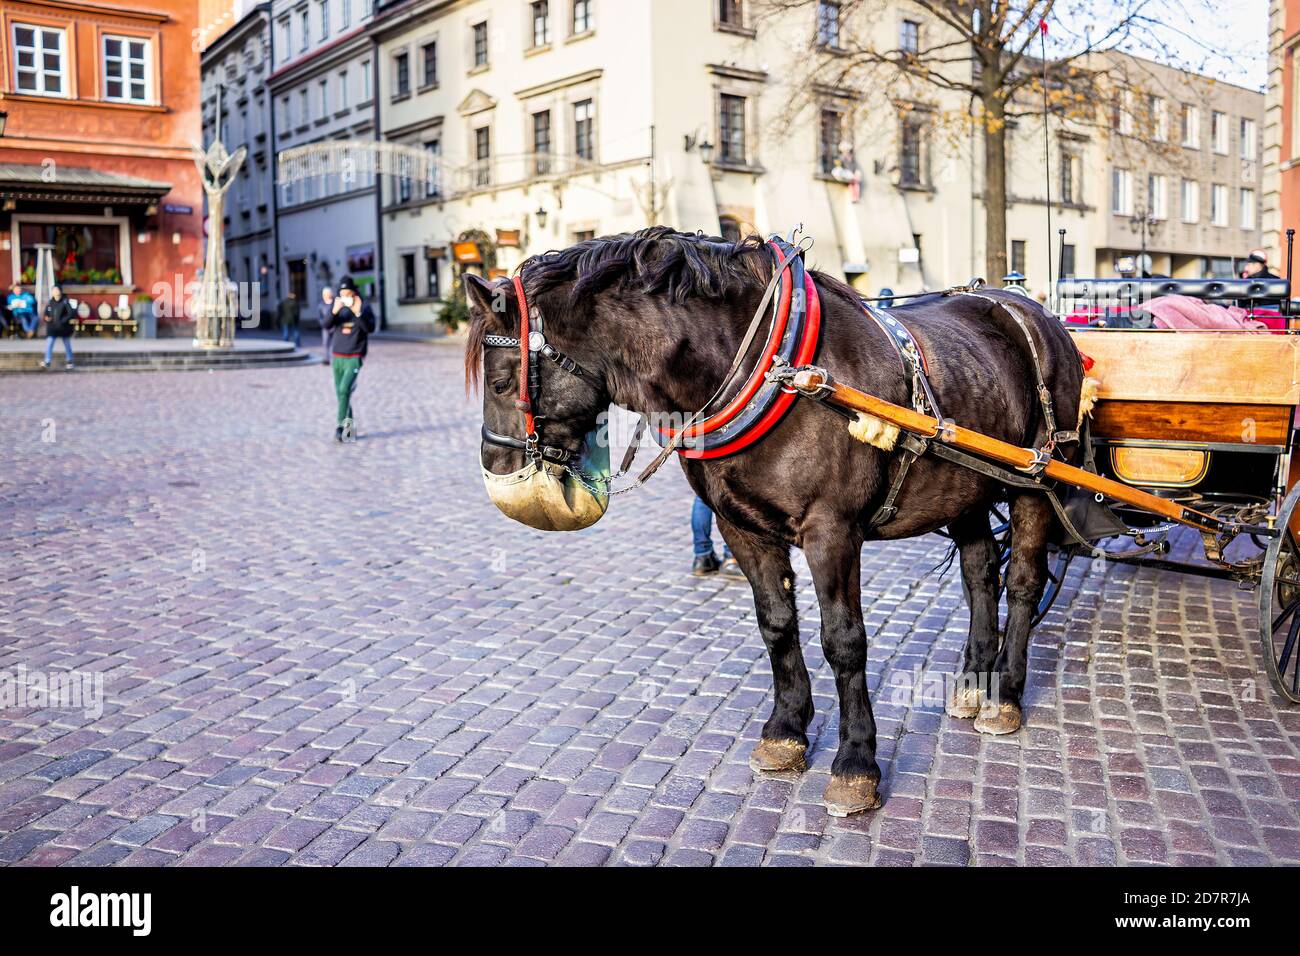 Warsaw, Poland historic buildings and horse carriage tour in old town during winter Christmas holiday with animal eating from feed bag on street Stock Photo